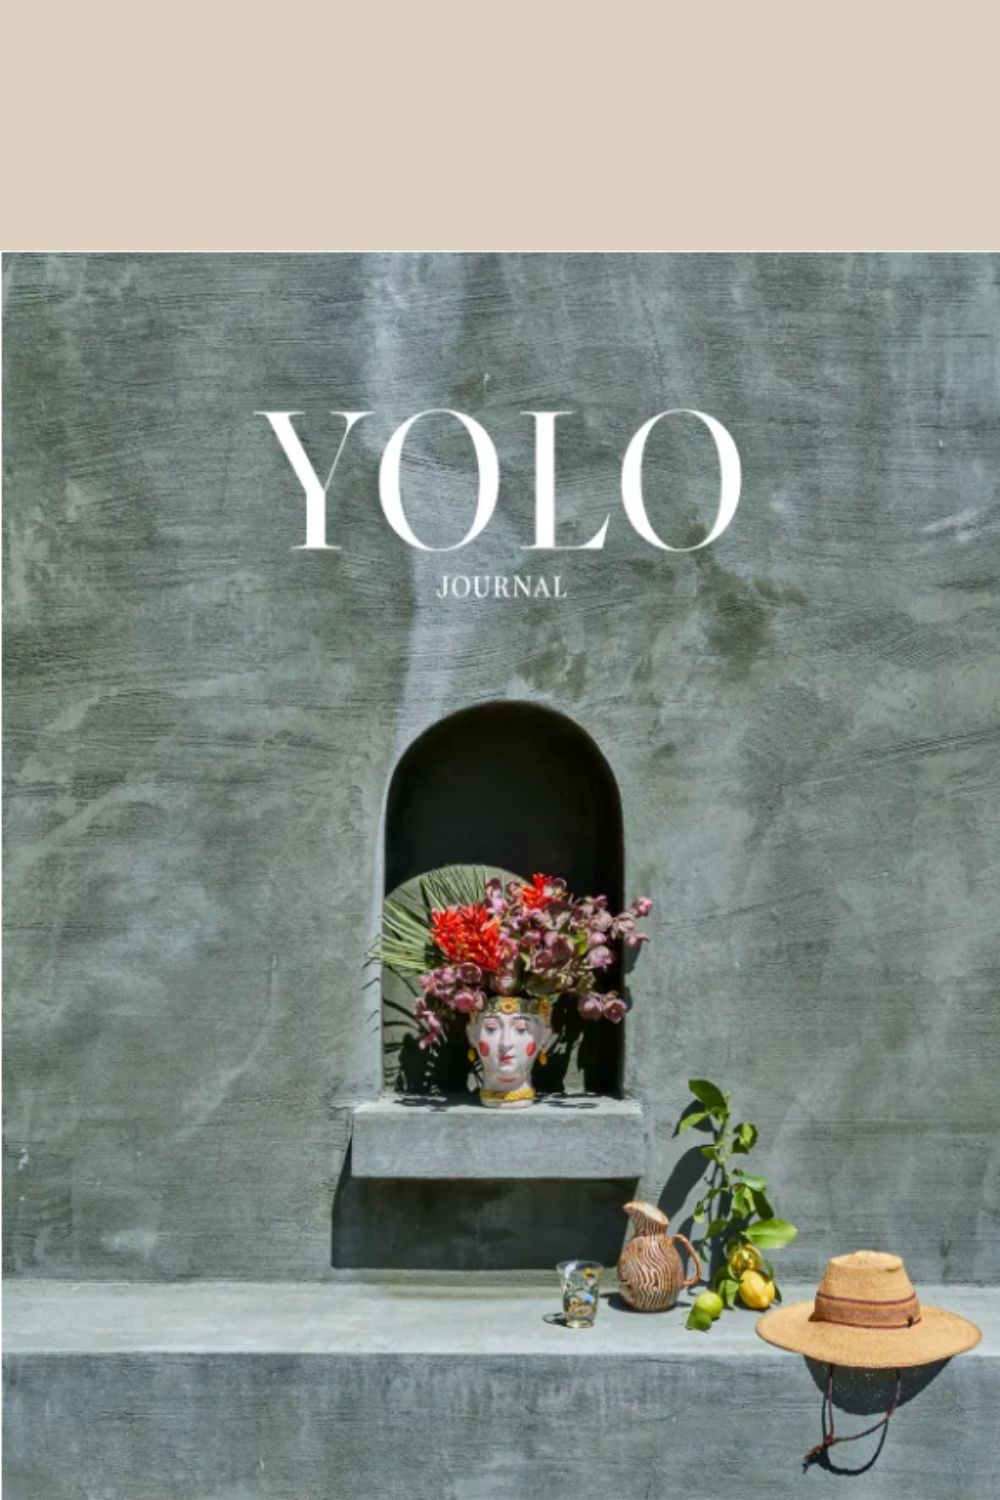 Yolo Journal Issue 13 cover 